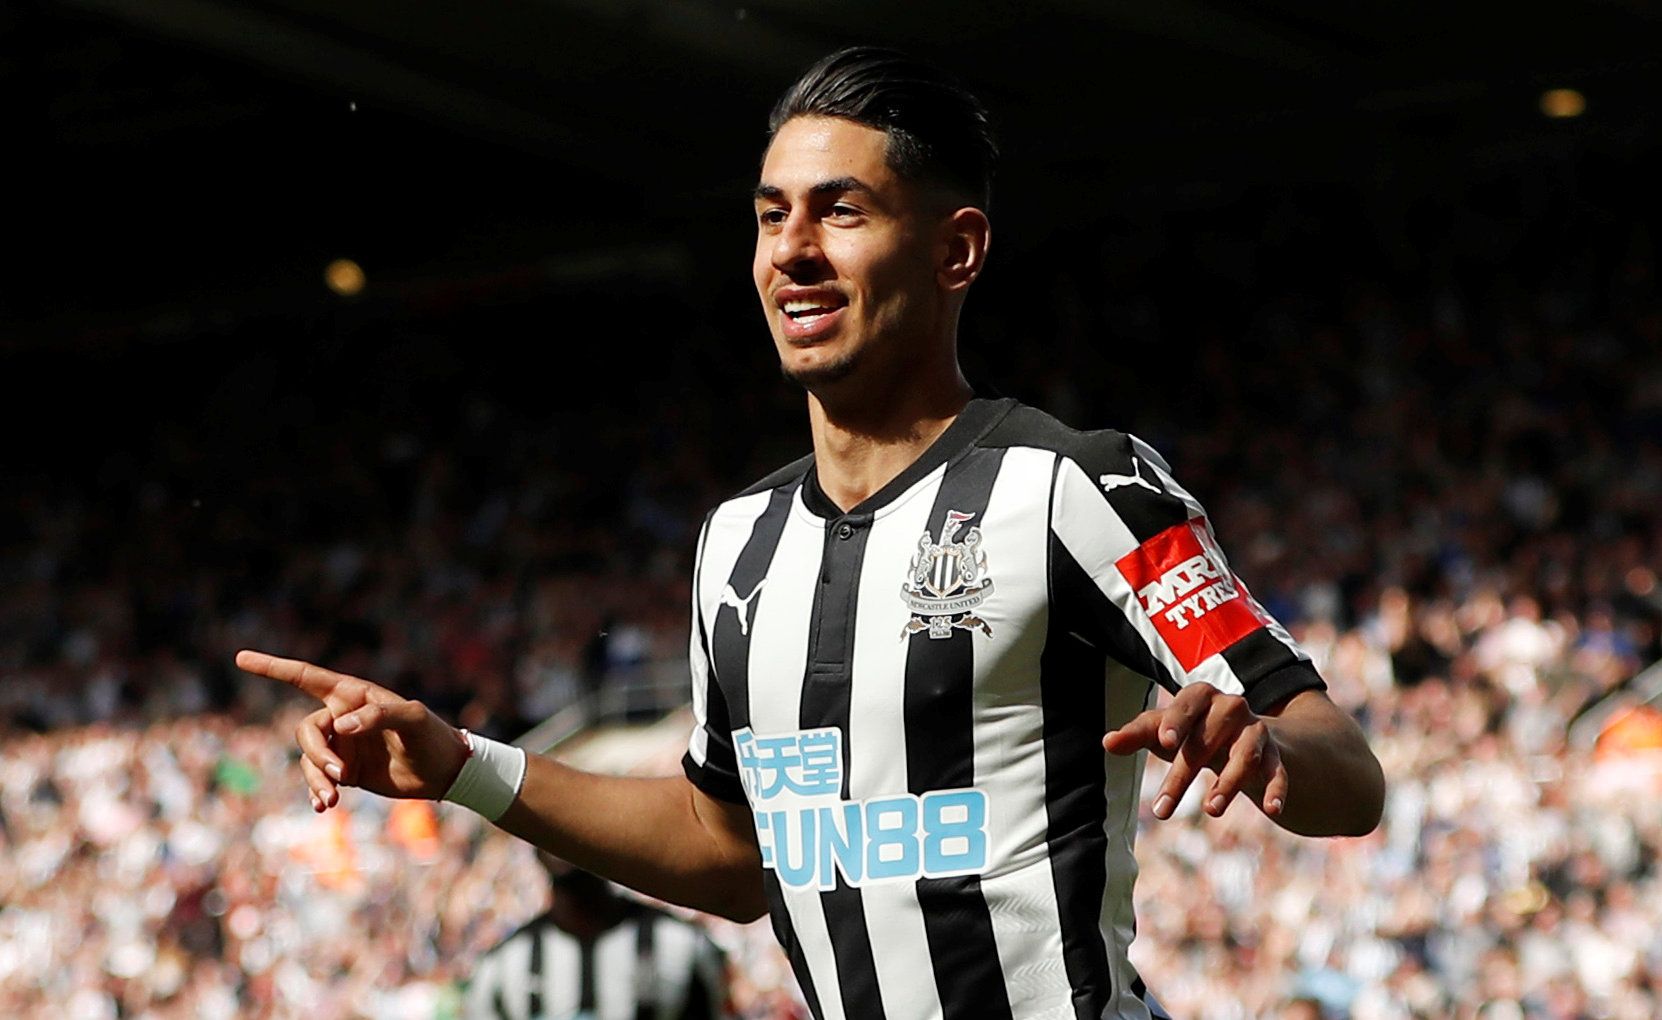 Soccer Football - Premier League - Newcastle United vs Chelsea - St James' Park, Newcastle, Britain - May 13, 2018   Newcastle United's Ayoze Perez celebrates scoring their second goal    Action Images via Reuters/Lee Smith    EDITORIAL USE ONLY. No use with unauthorized audio, video, data, fixture lists, club/league logos or 